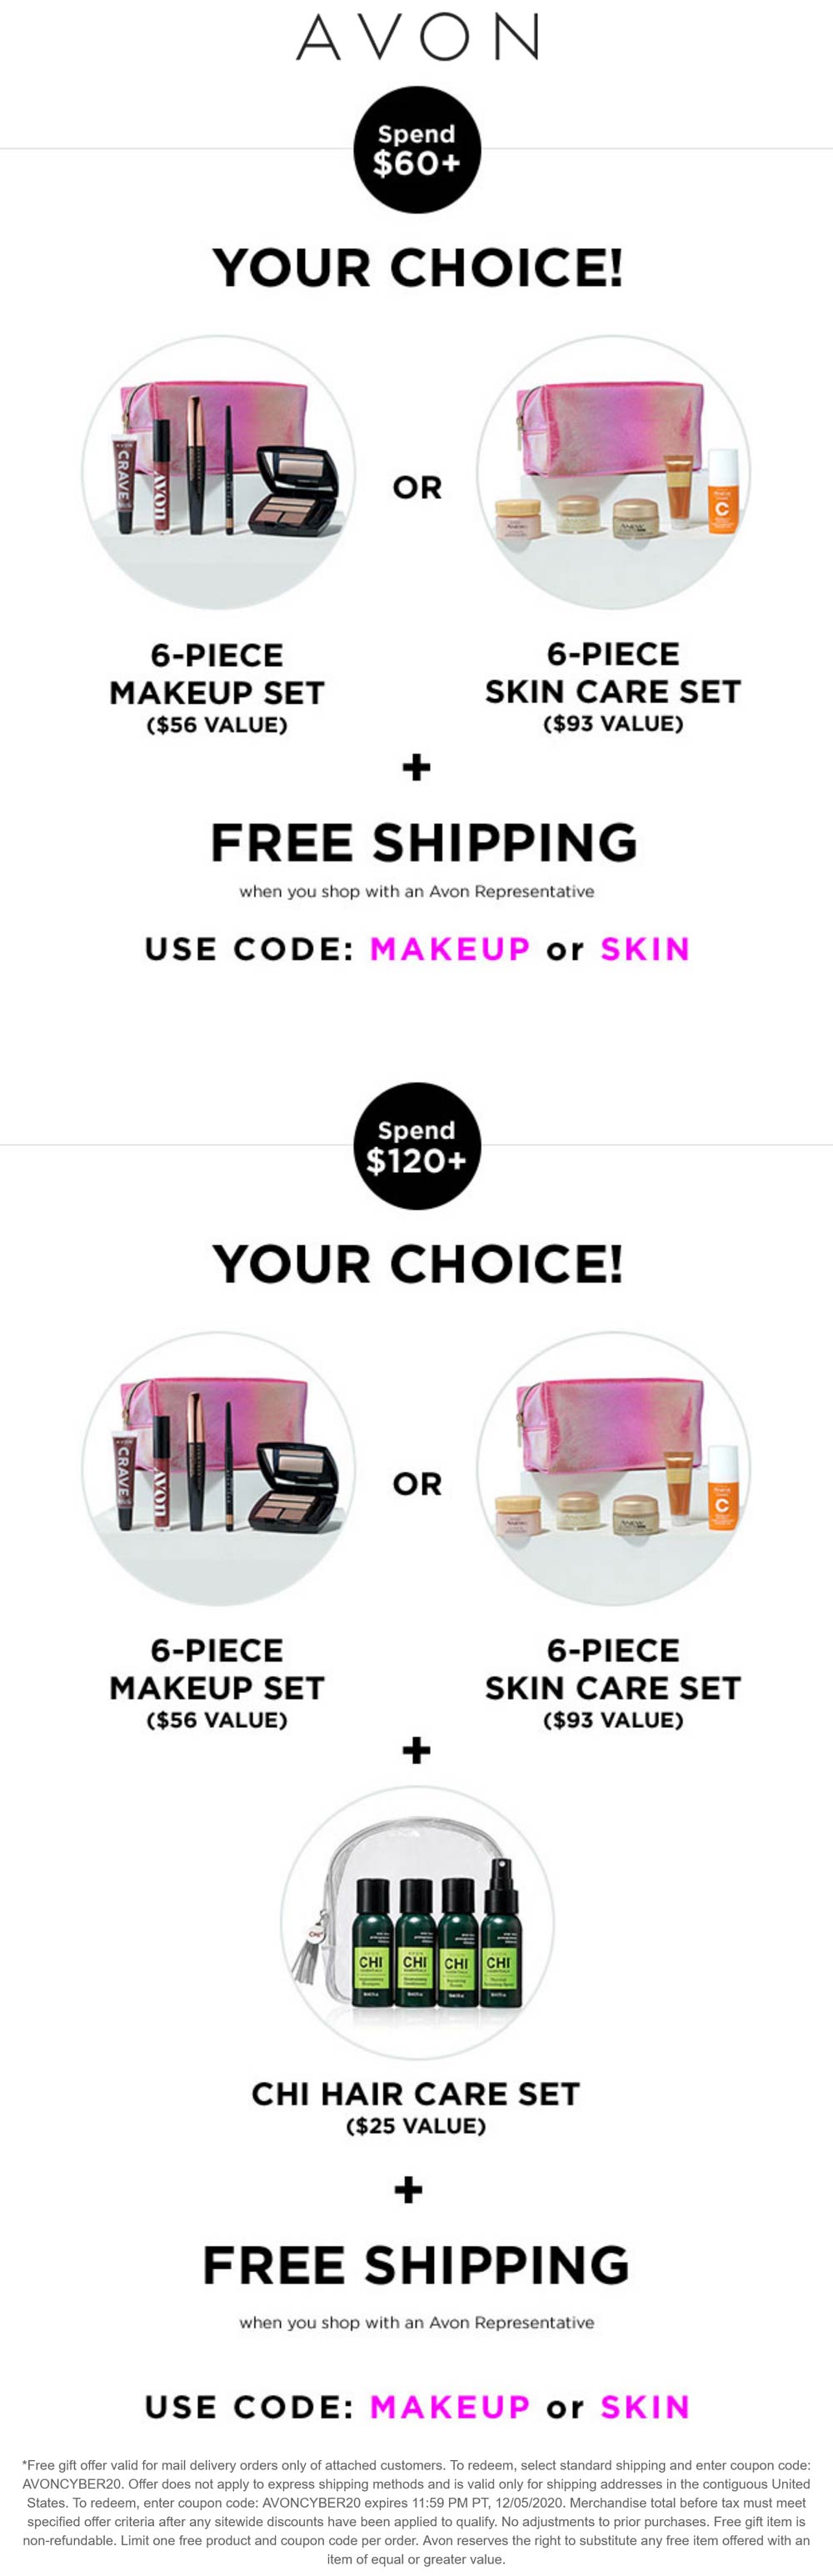 AVON stores Coupon  Free gift sets & shipping on $60+ spent at AVON cosmetics via promo code AVONCYBER20 #avon 